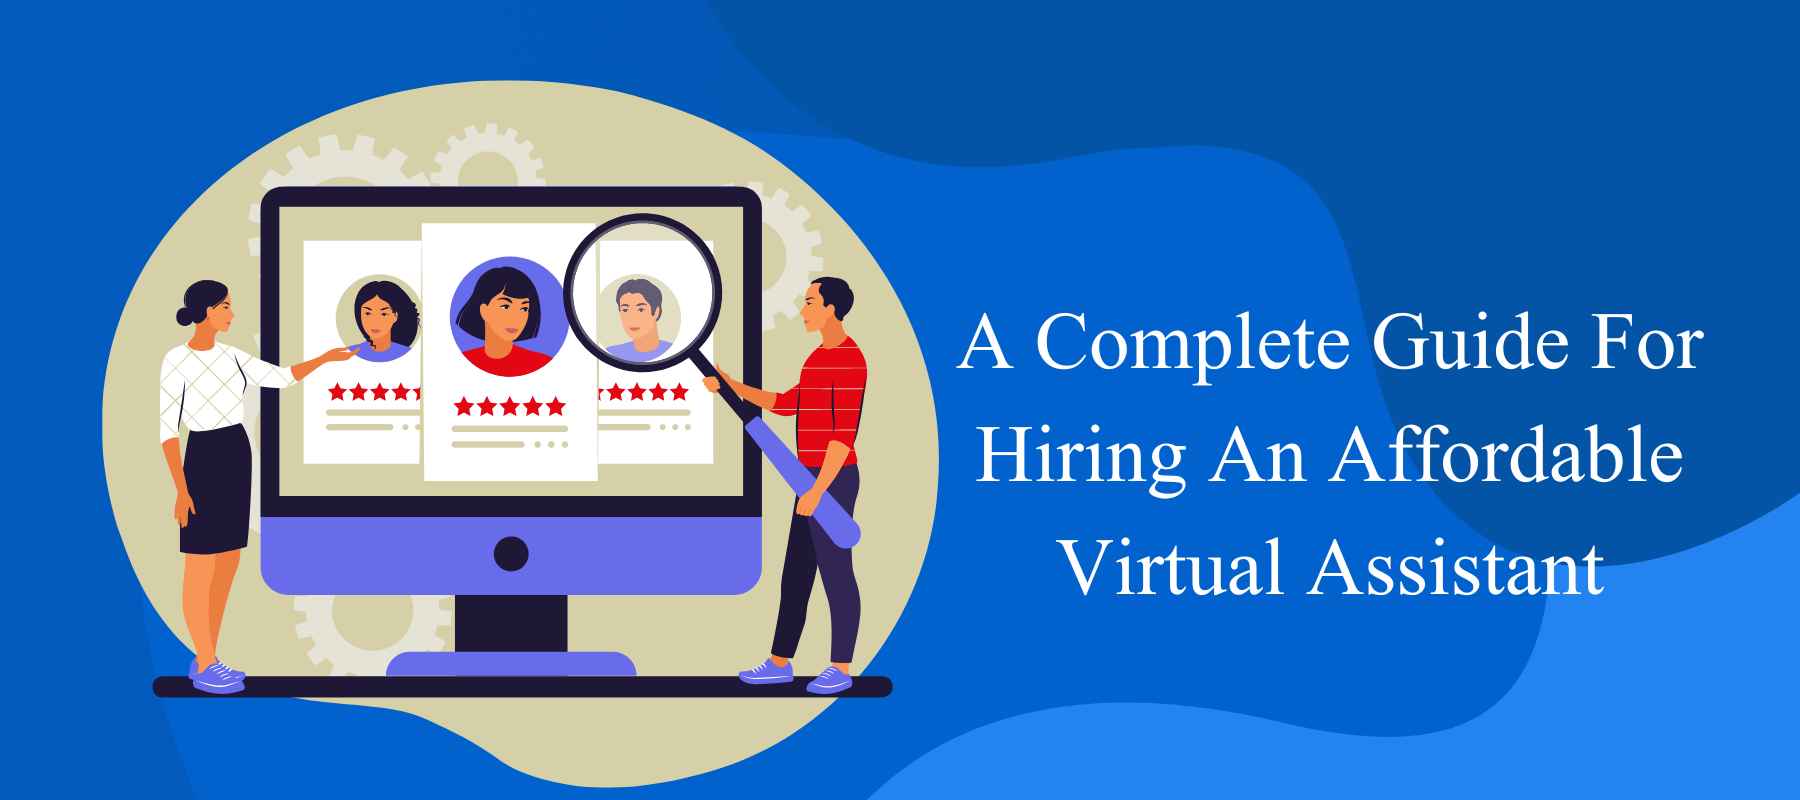 Hiring An Affordable Virtual Assistant